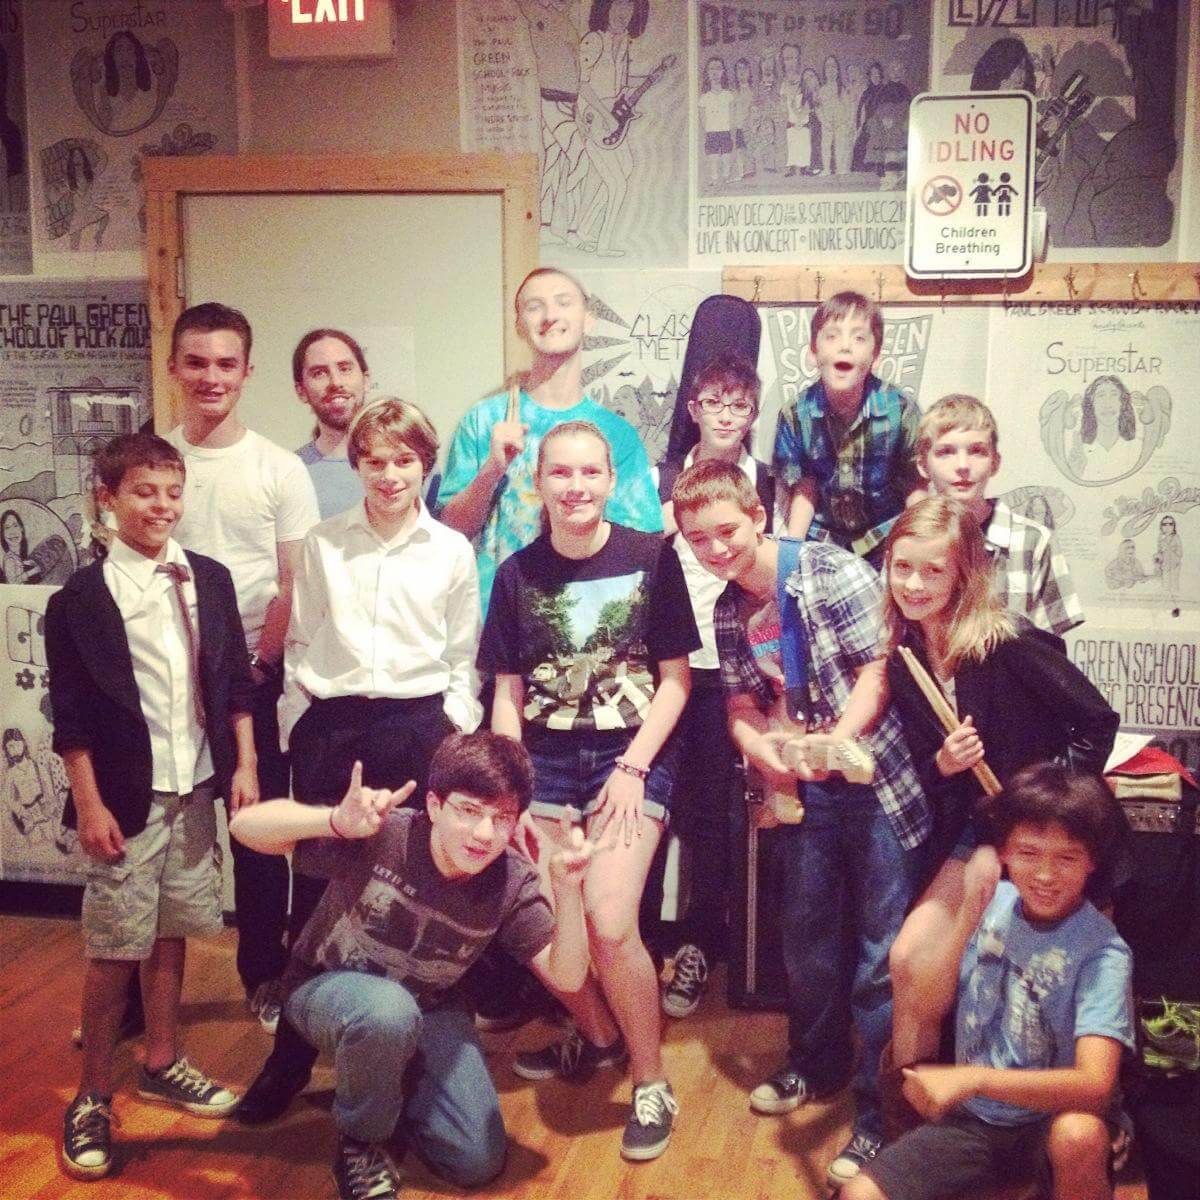 School of Rock Doylestown is a community. Our students don't just take music lessons, they make like-minded friends.